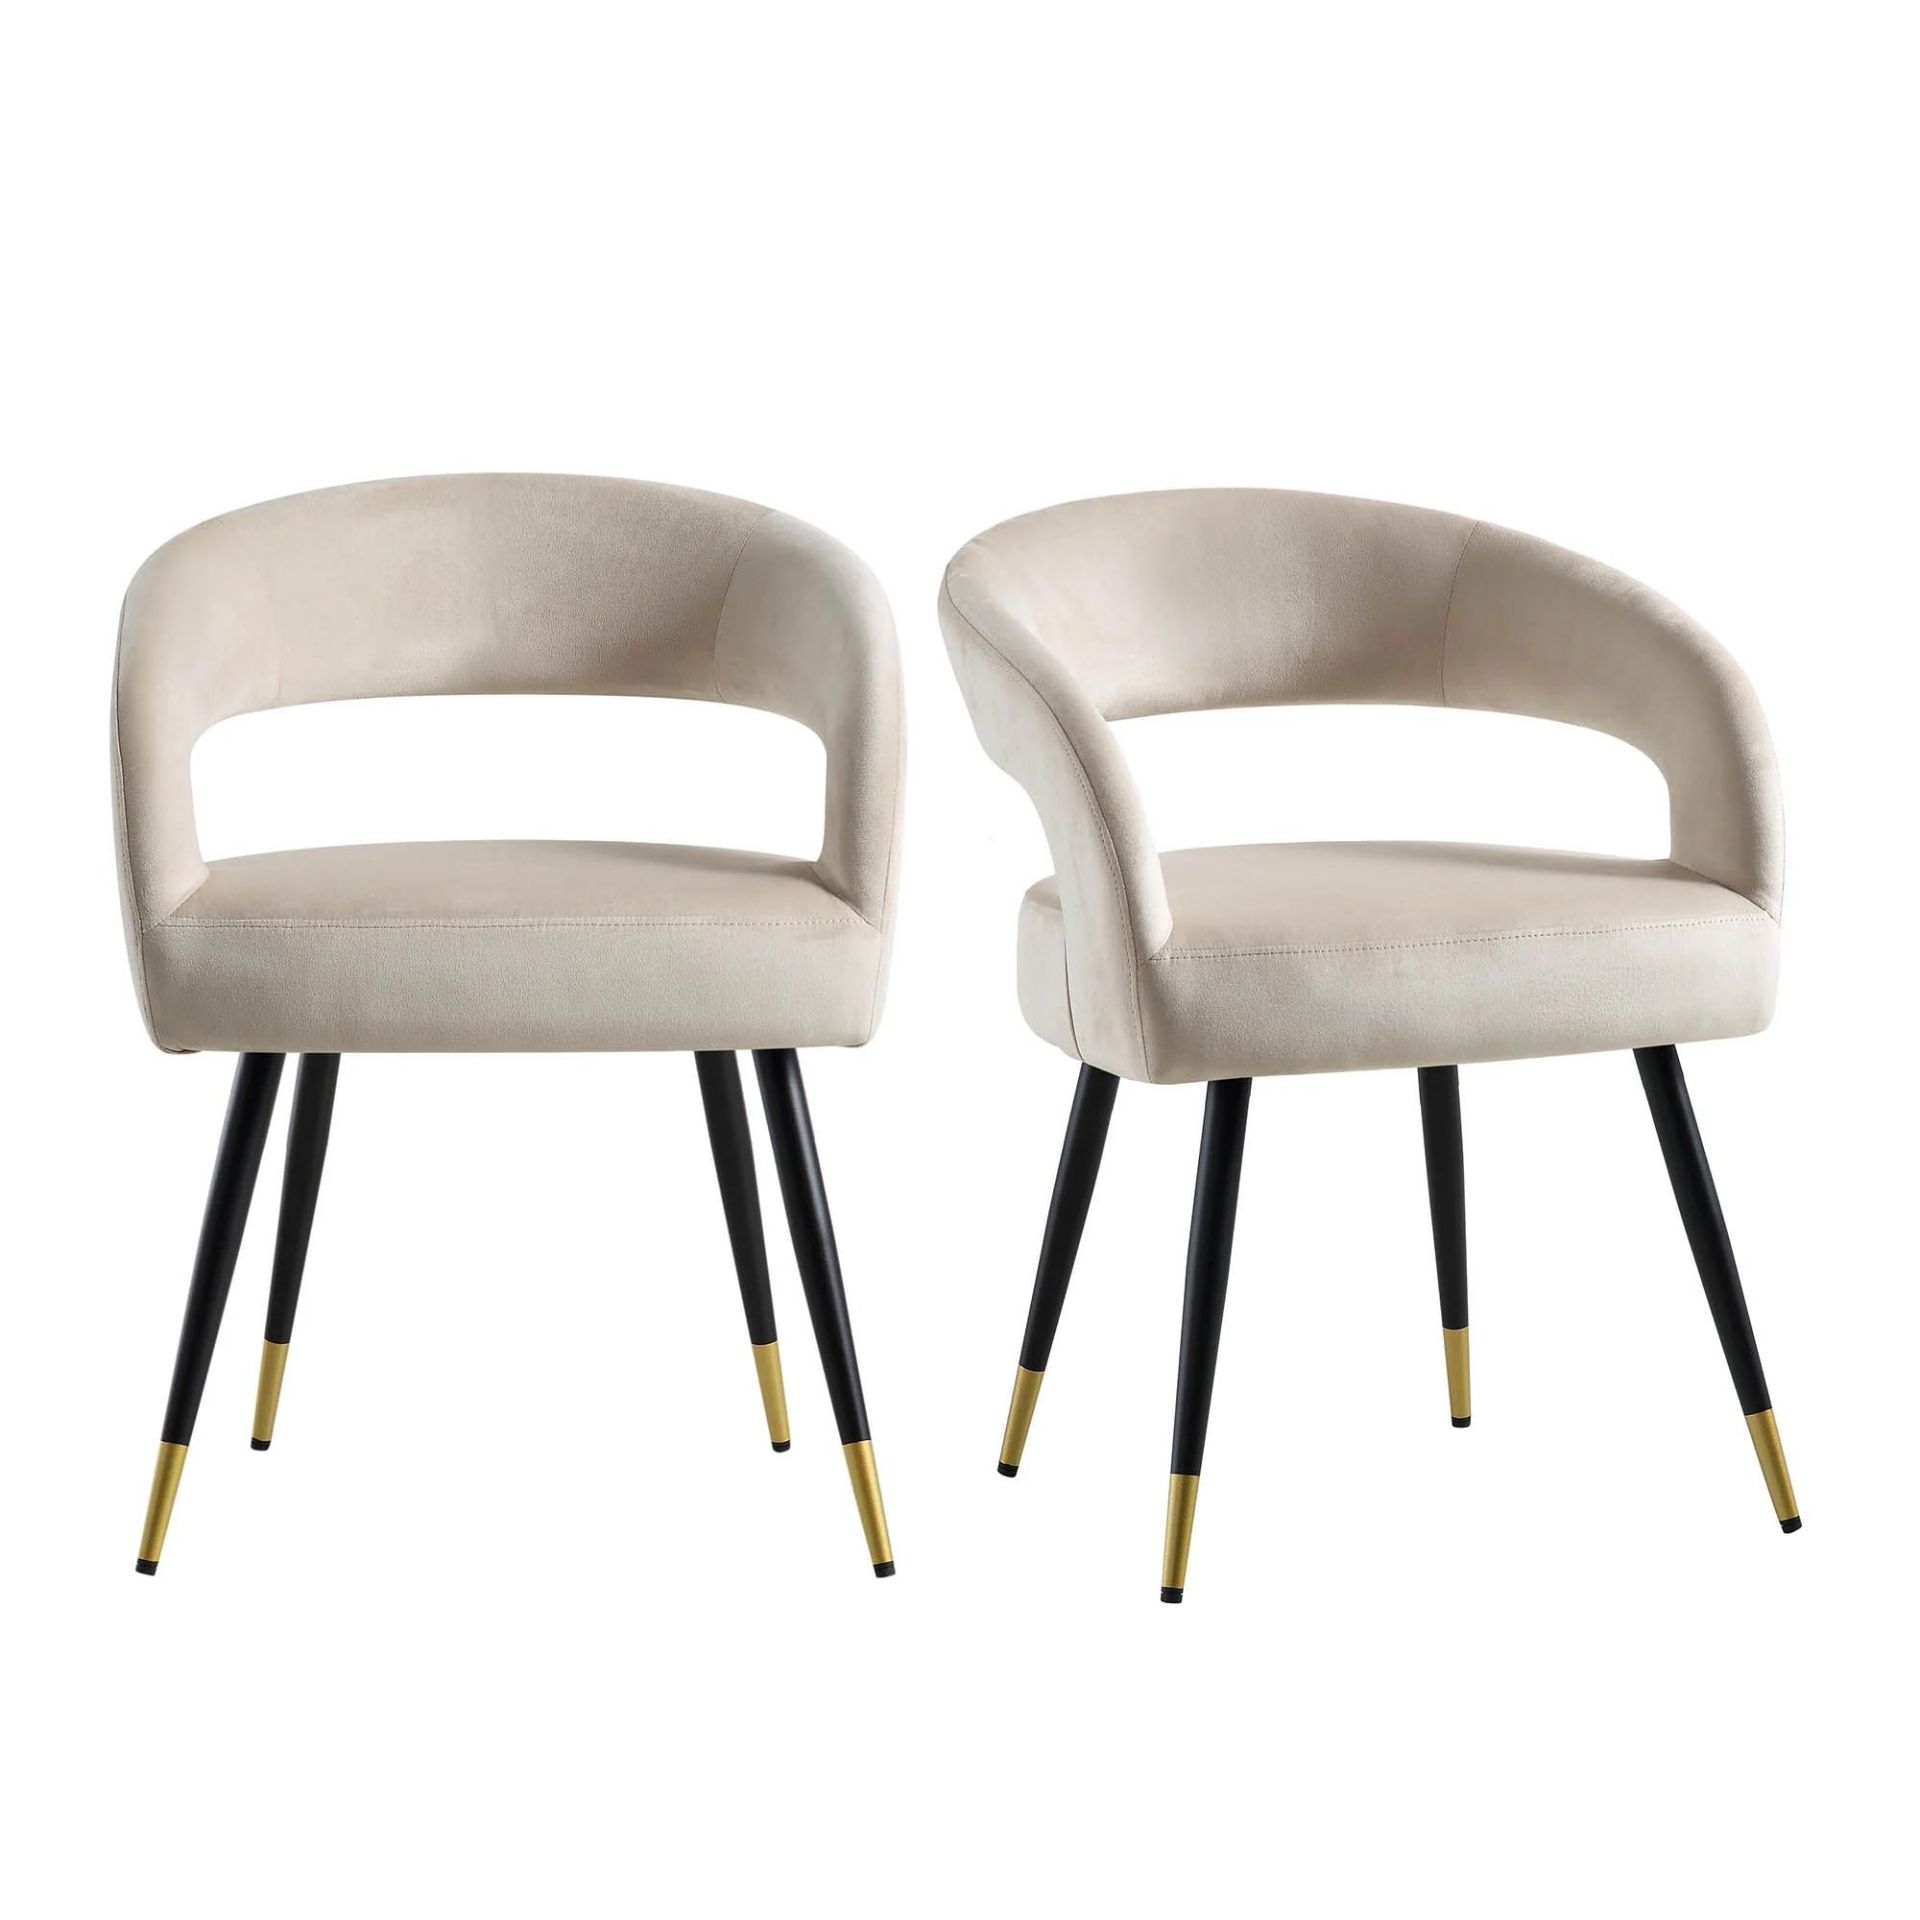 Laurel Wave Champagne Velvet Set of 2 Dining Chairs. - R19.2. RRP £299.99. The curved cut out - Image 4 of 4